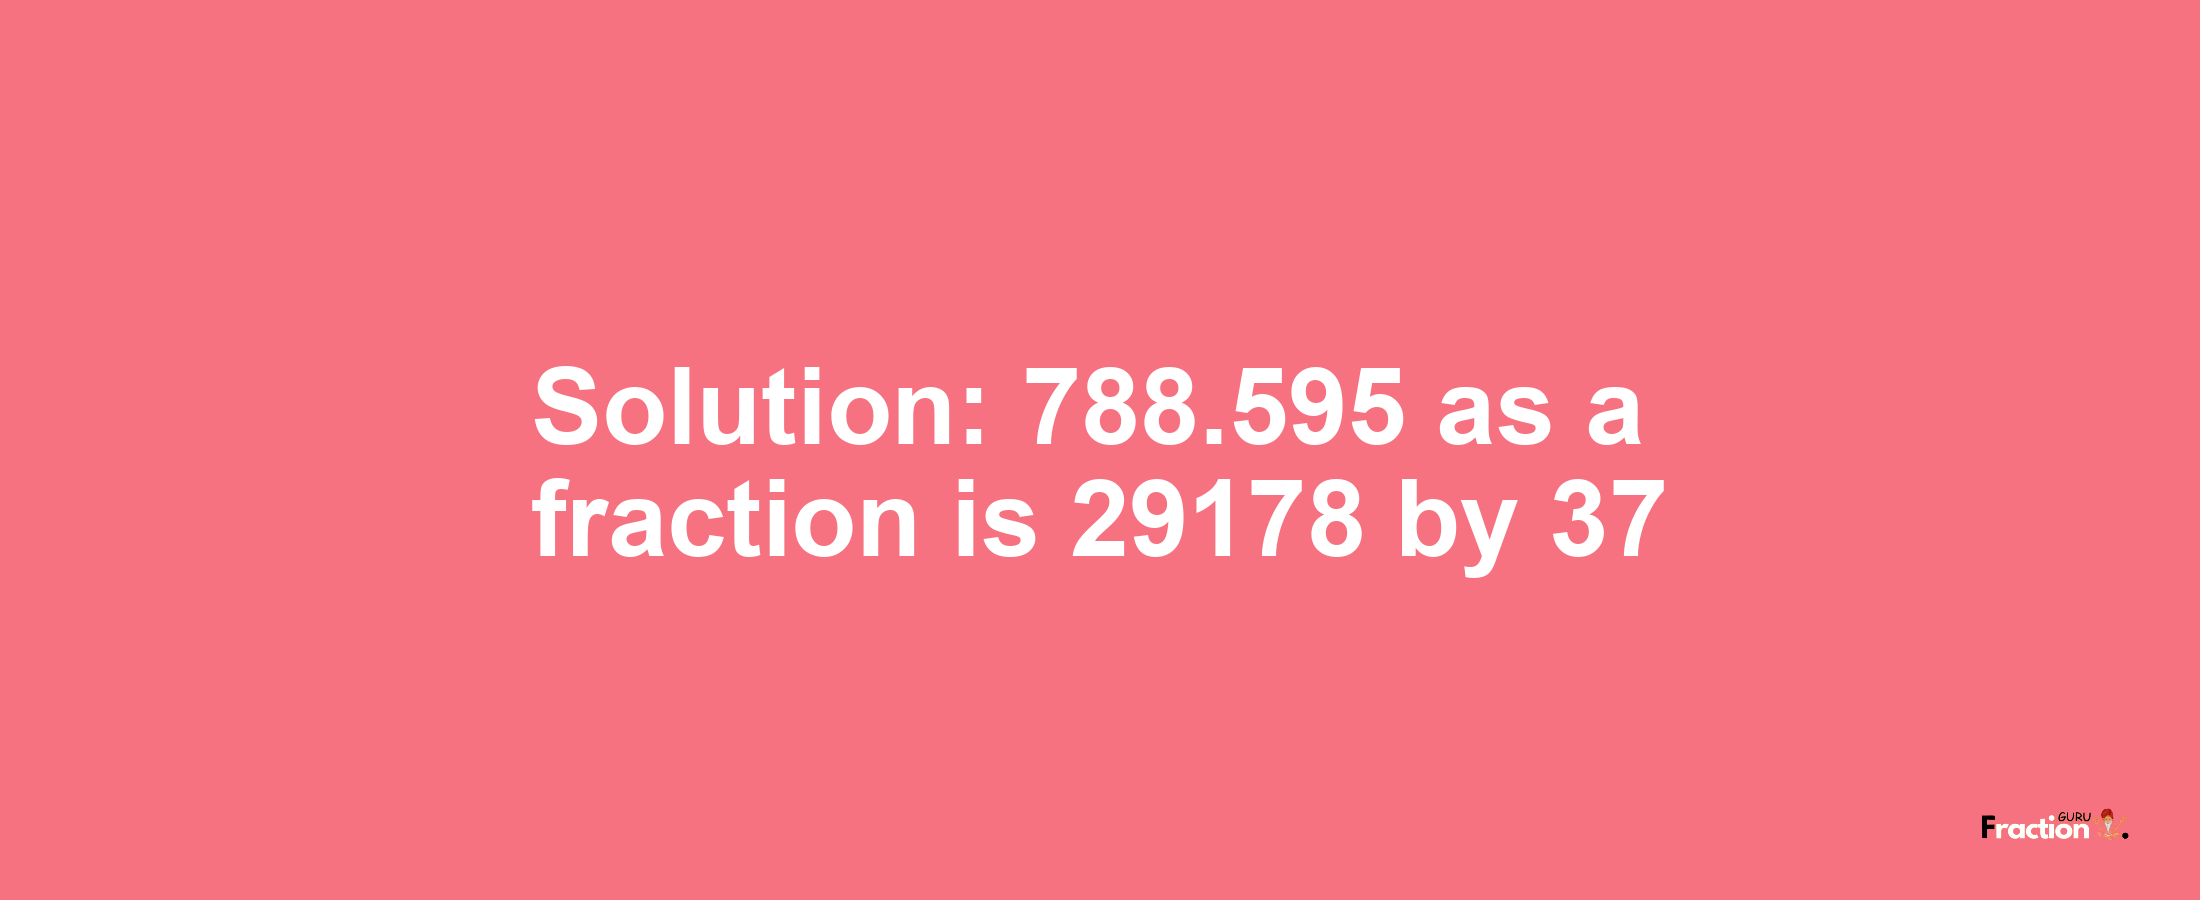 Solution:788.595 as a fraction is 29178/37